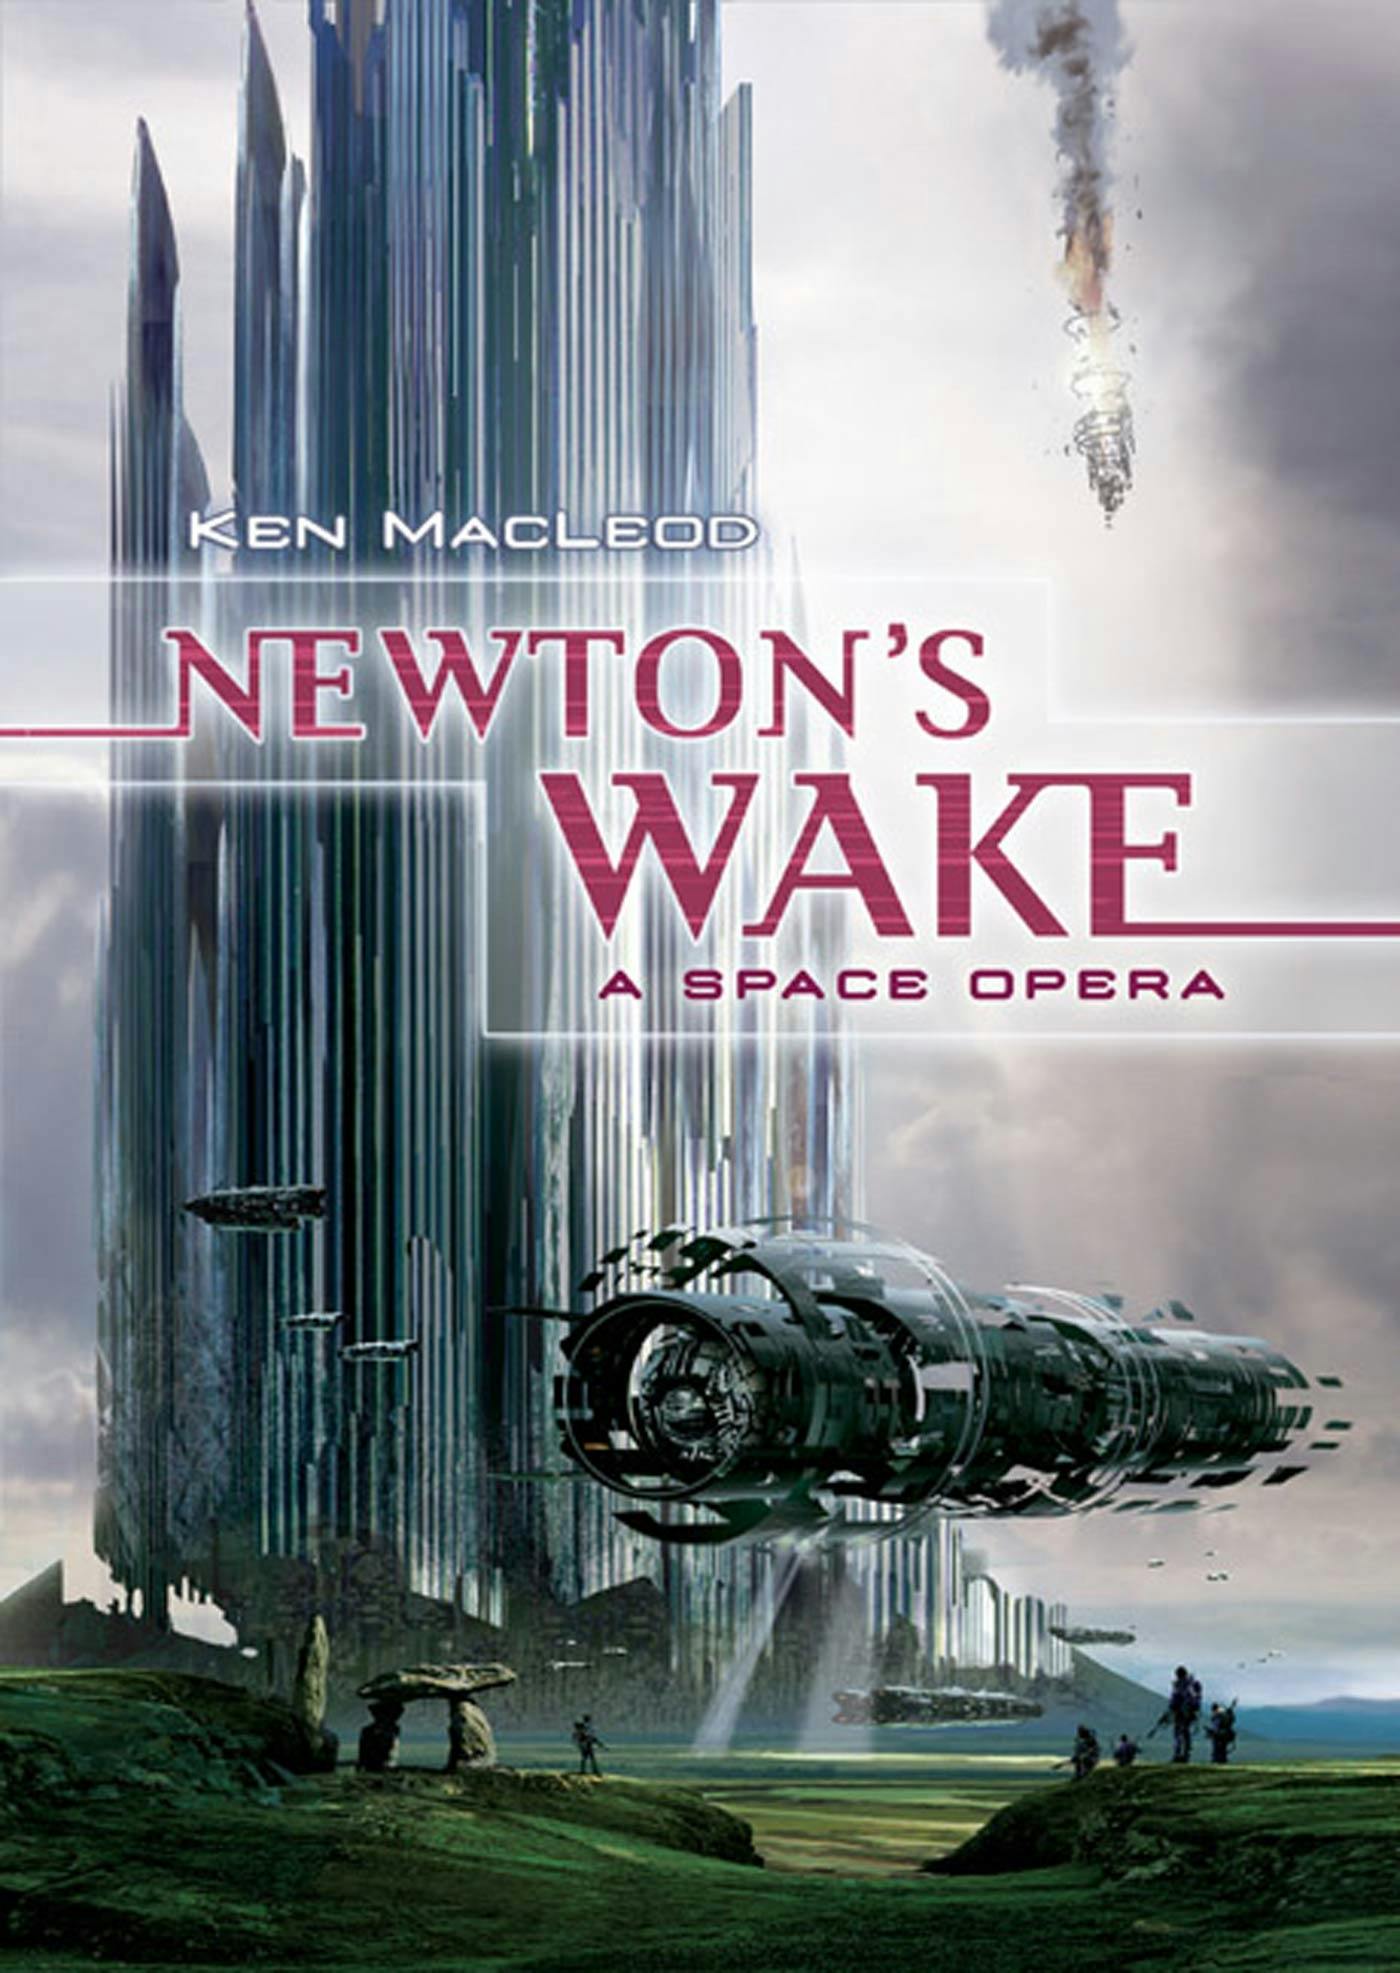 Cover for the book titled as: Newton's Wake